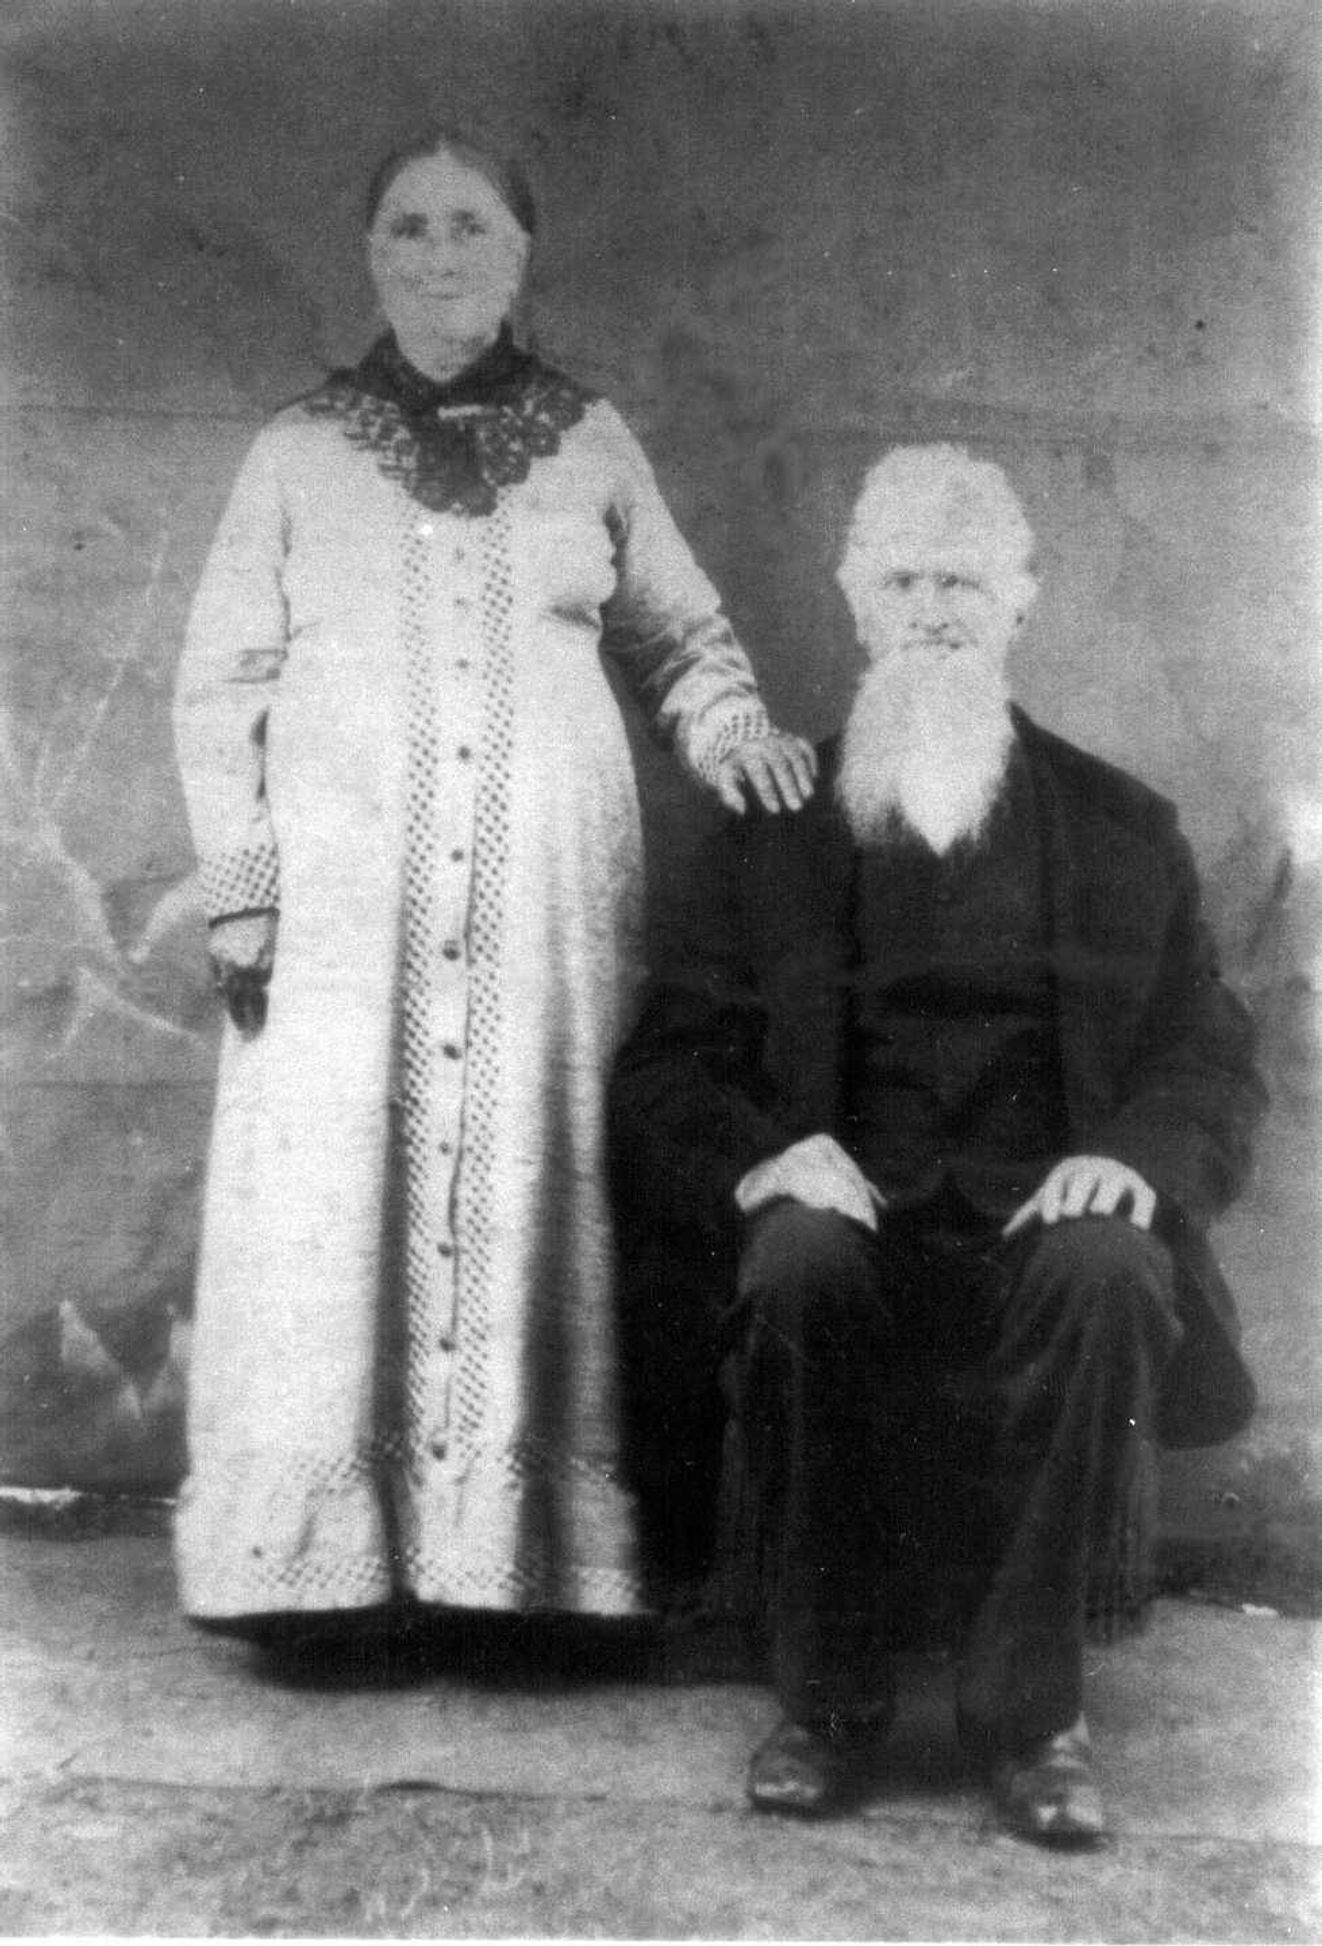 Woman dressed in white dress standing next to man who is sitting dressed in black overcoat.